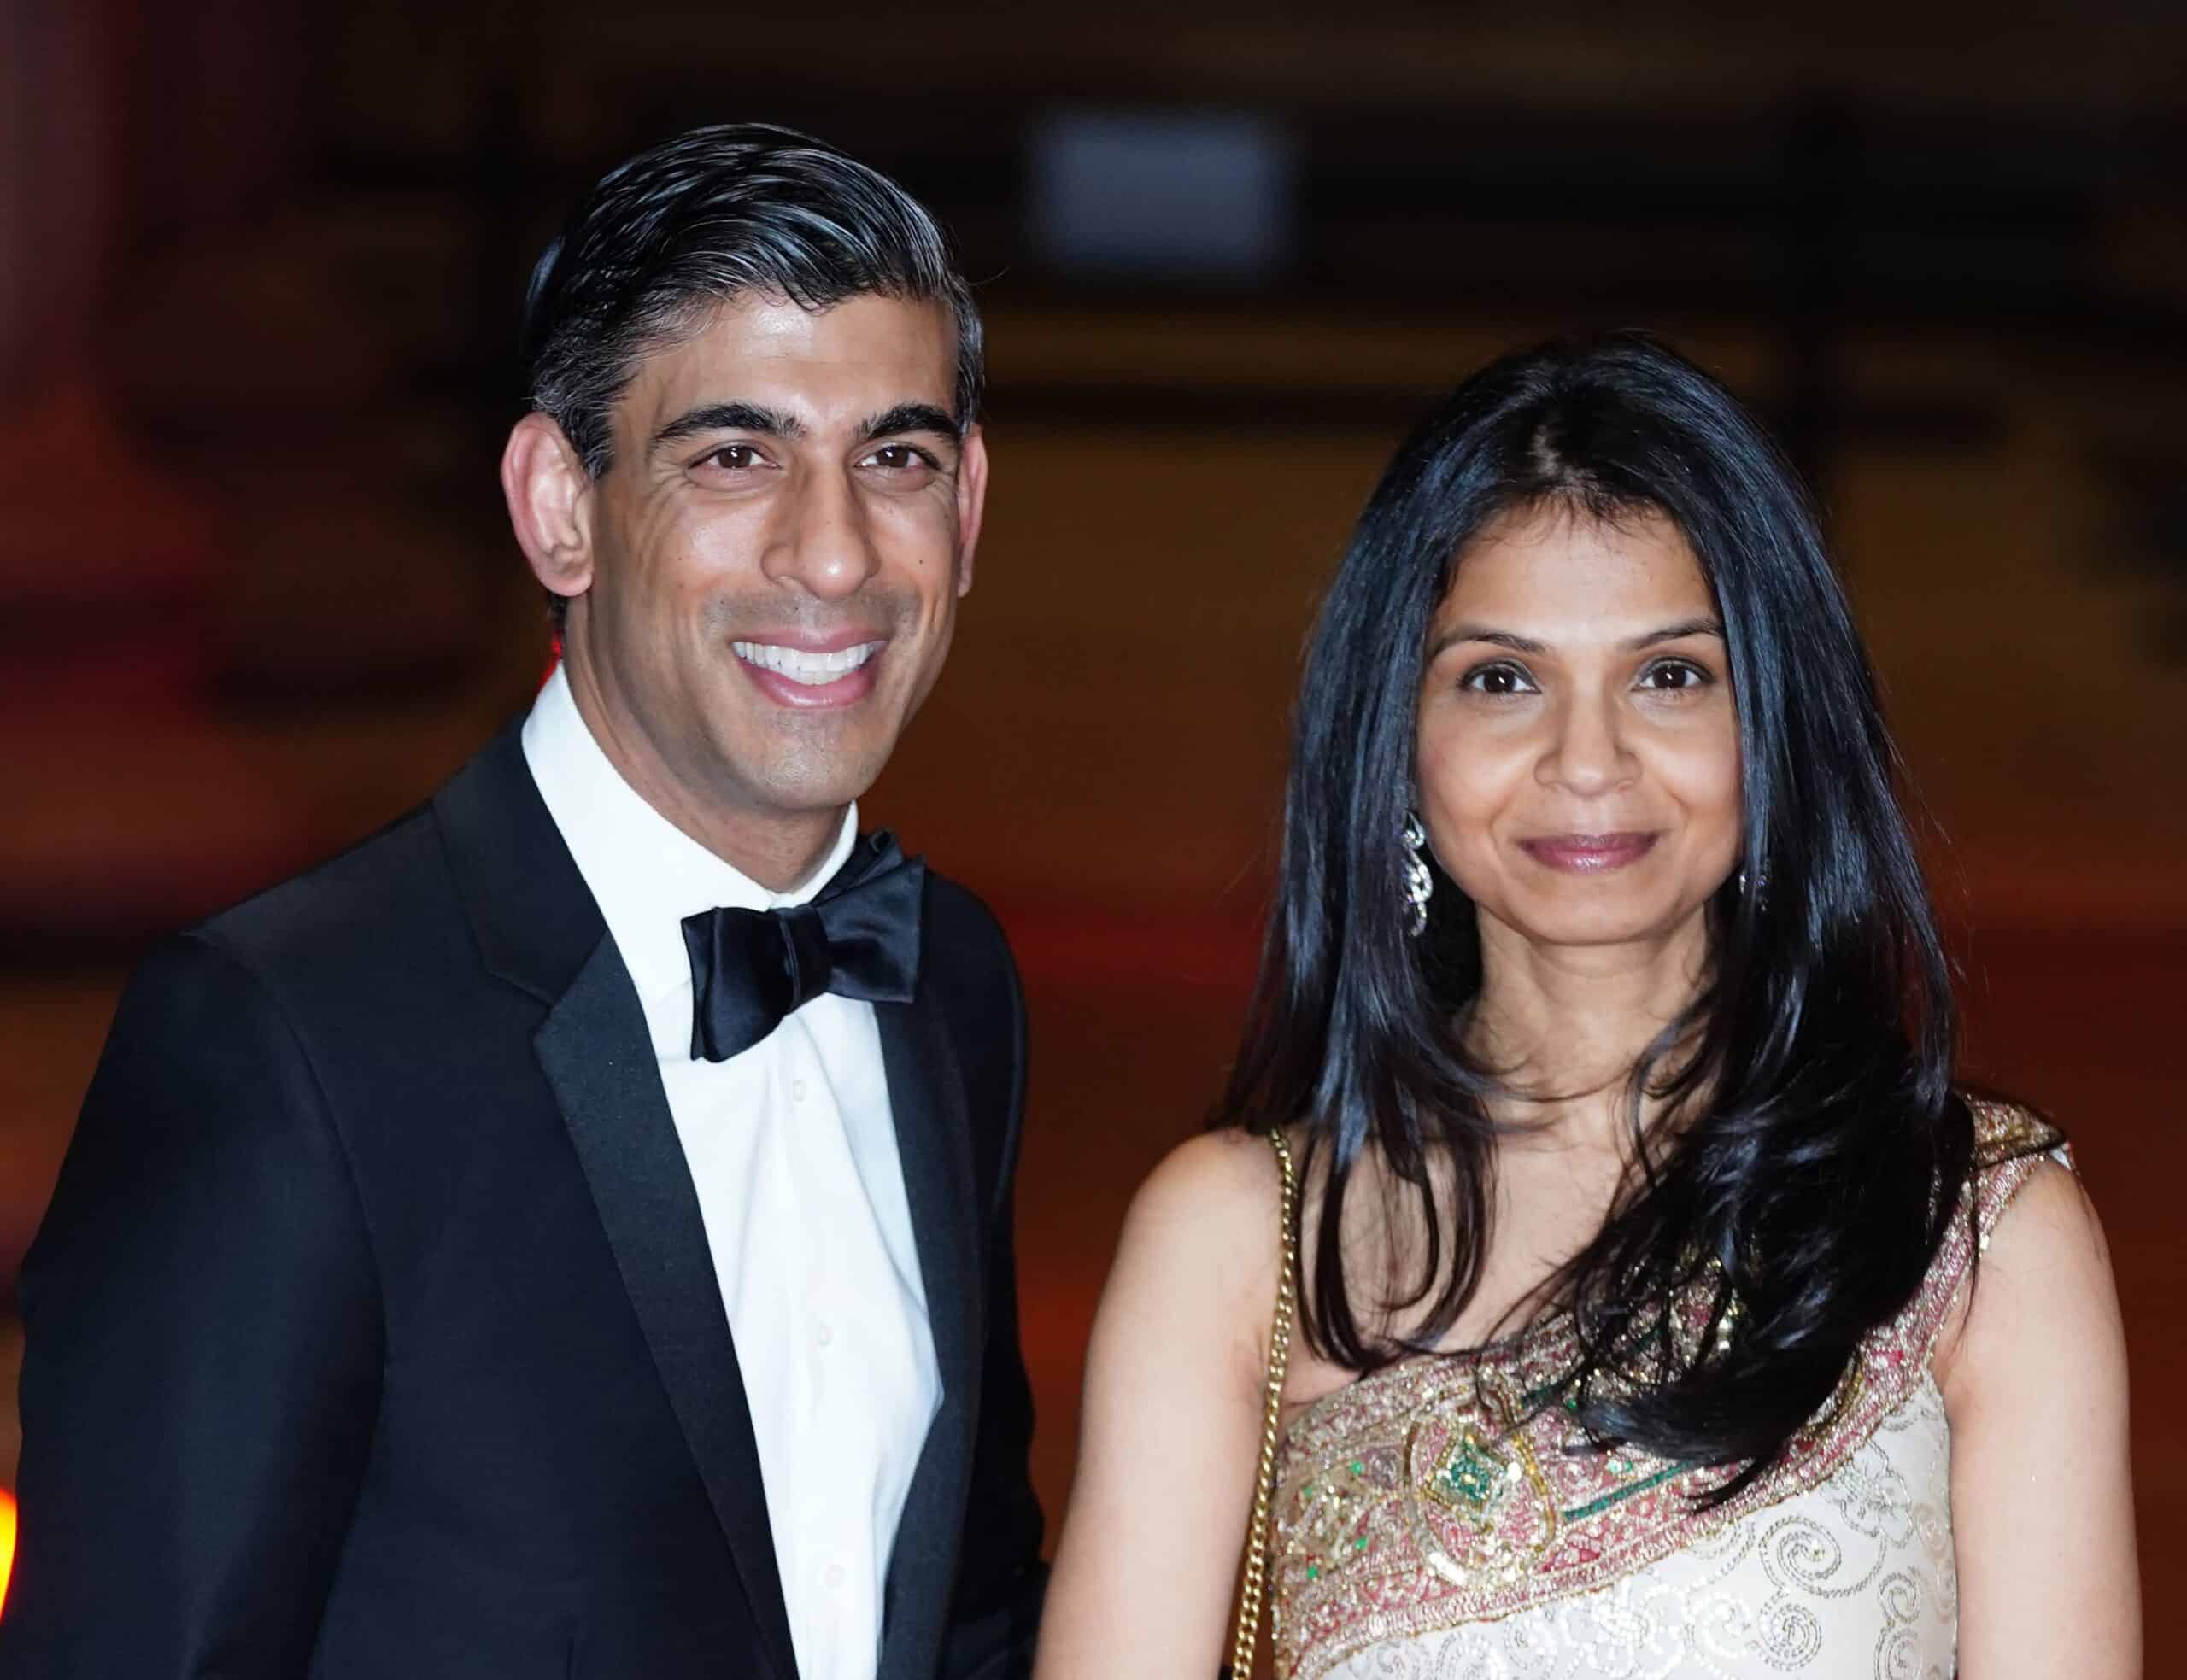 Sunak’s wife held shares in collapsed firm that received £300k taxpayer loan